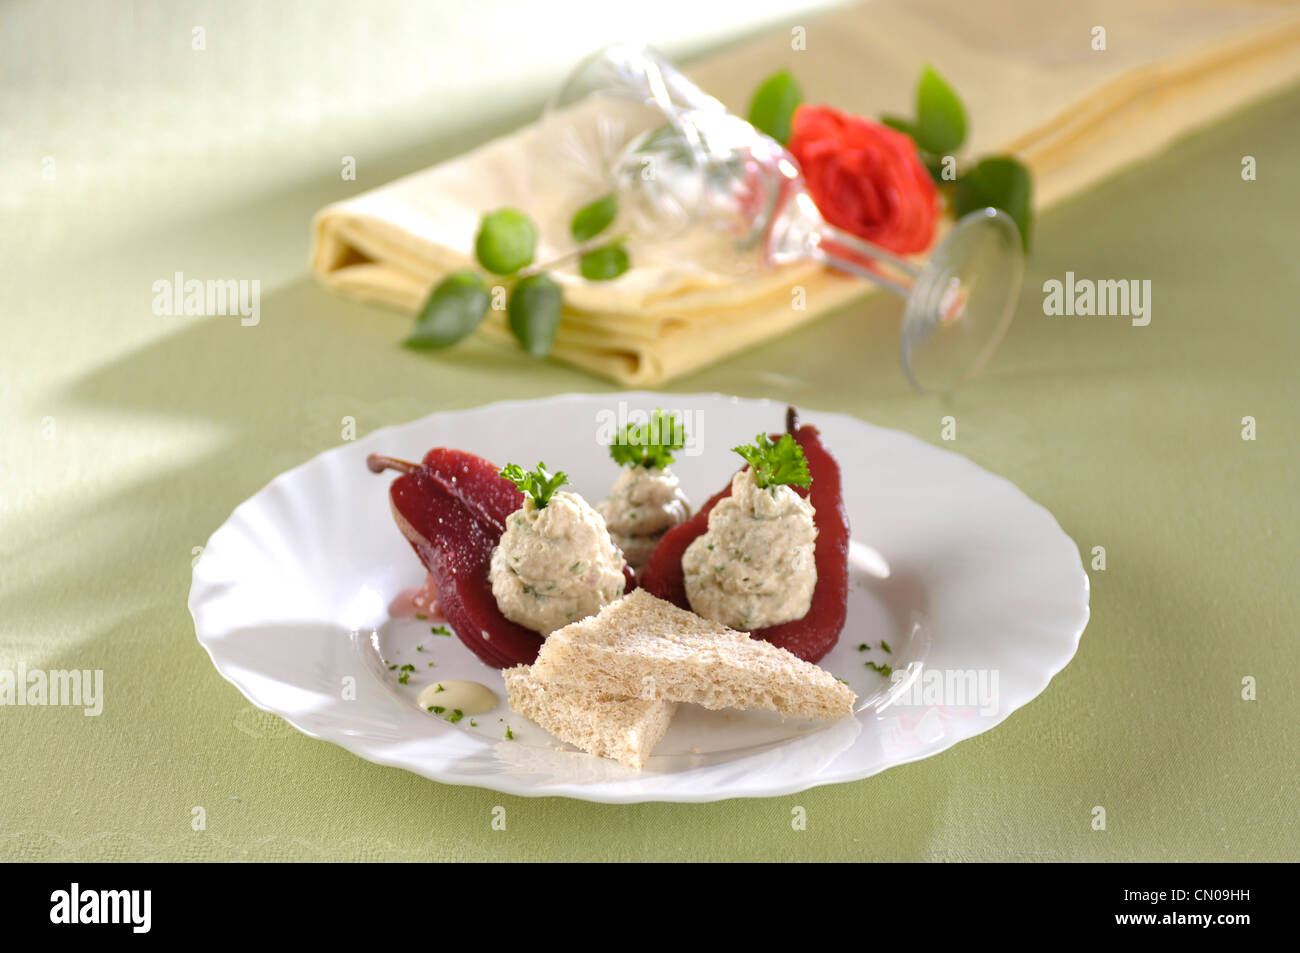 Sandwiches (pear with red wine) Stock Photo